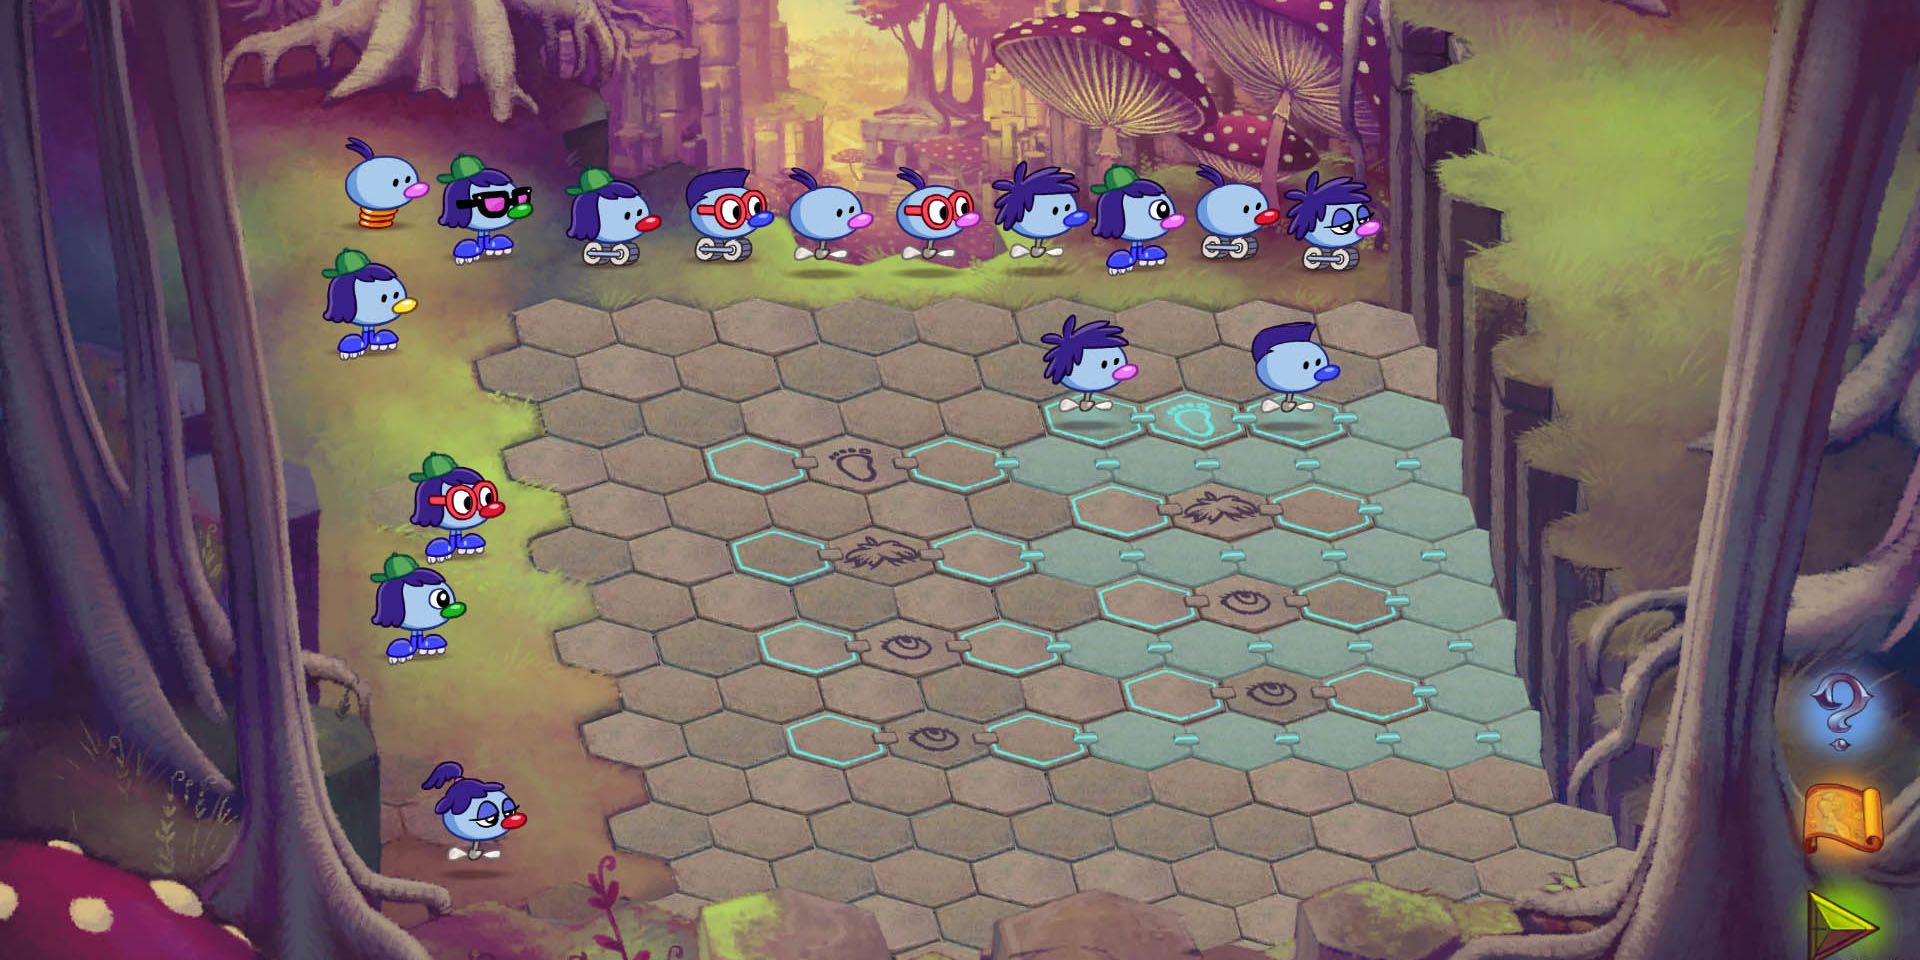 Zoombinis' game in a mushroom forest showing the little creatures solving a rune tile puzzle